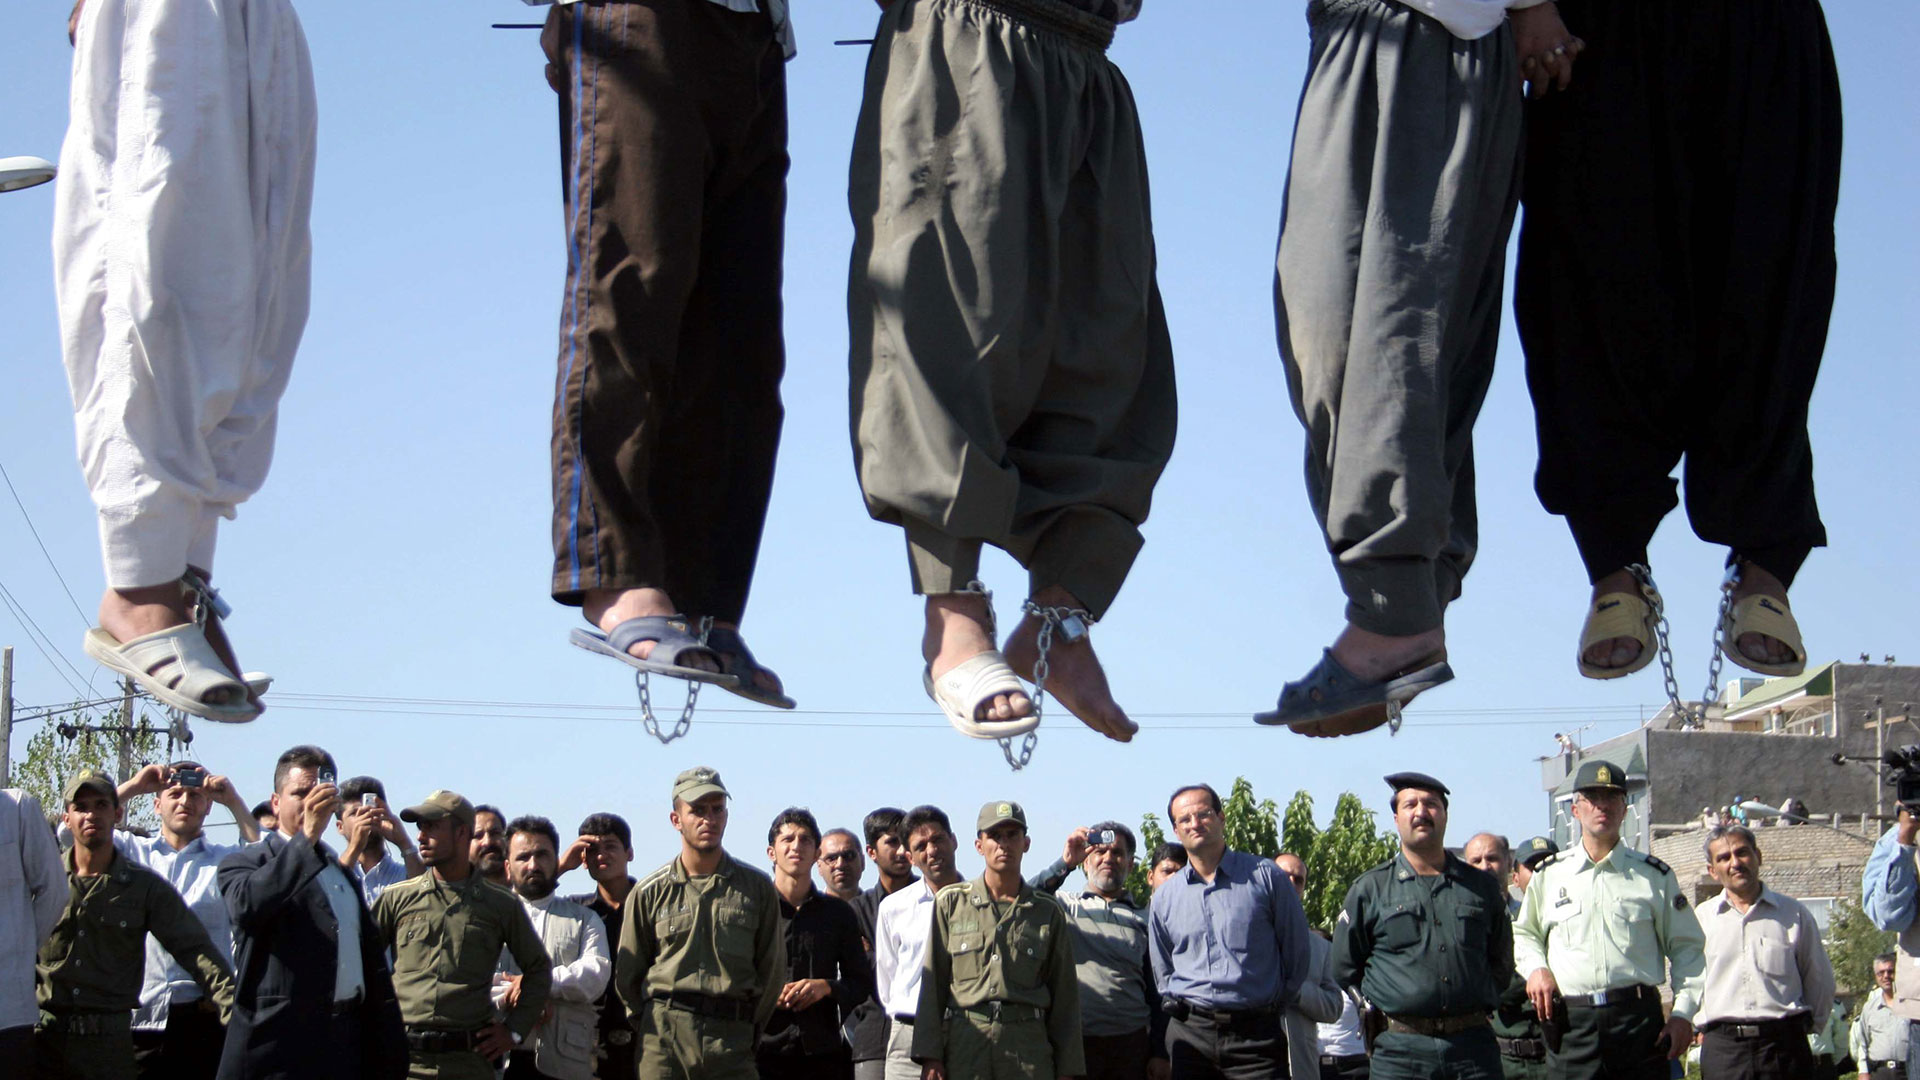 At least 333 people will be executed in Iran by 2021